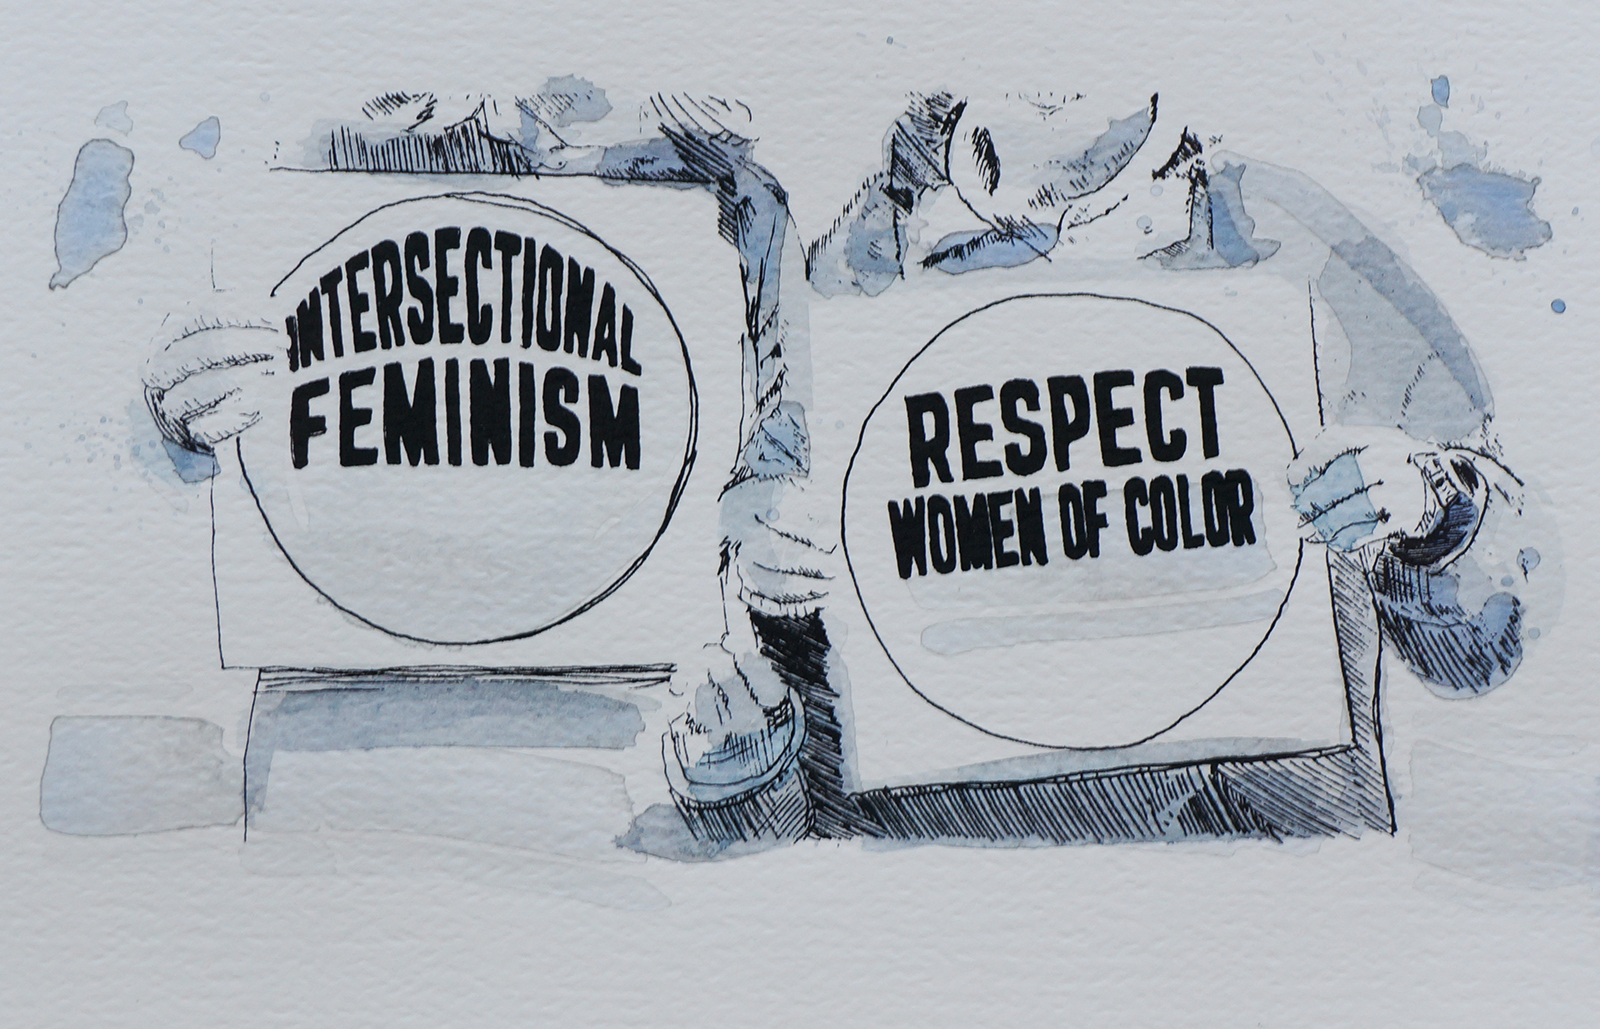 Ape_Bleakney_March Mixed Media - 'Intersectional (1)', 6.5''x9.5'', Screen Print + Watercolor, 2018 copy.jpg